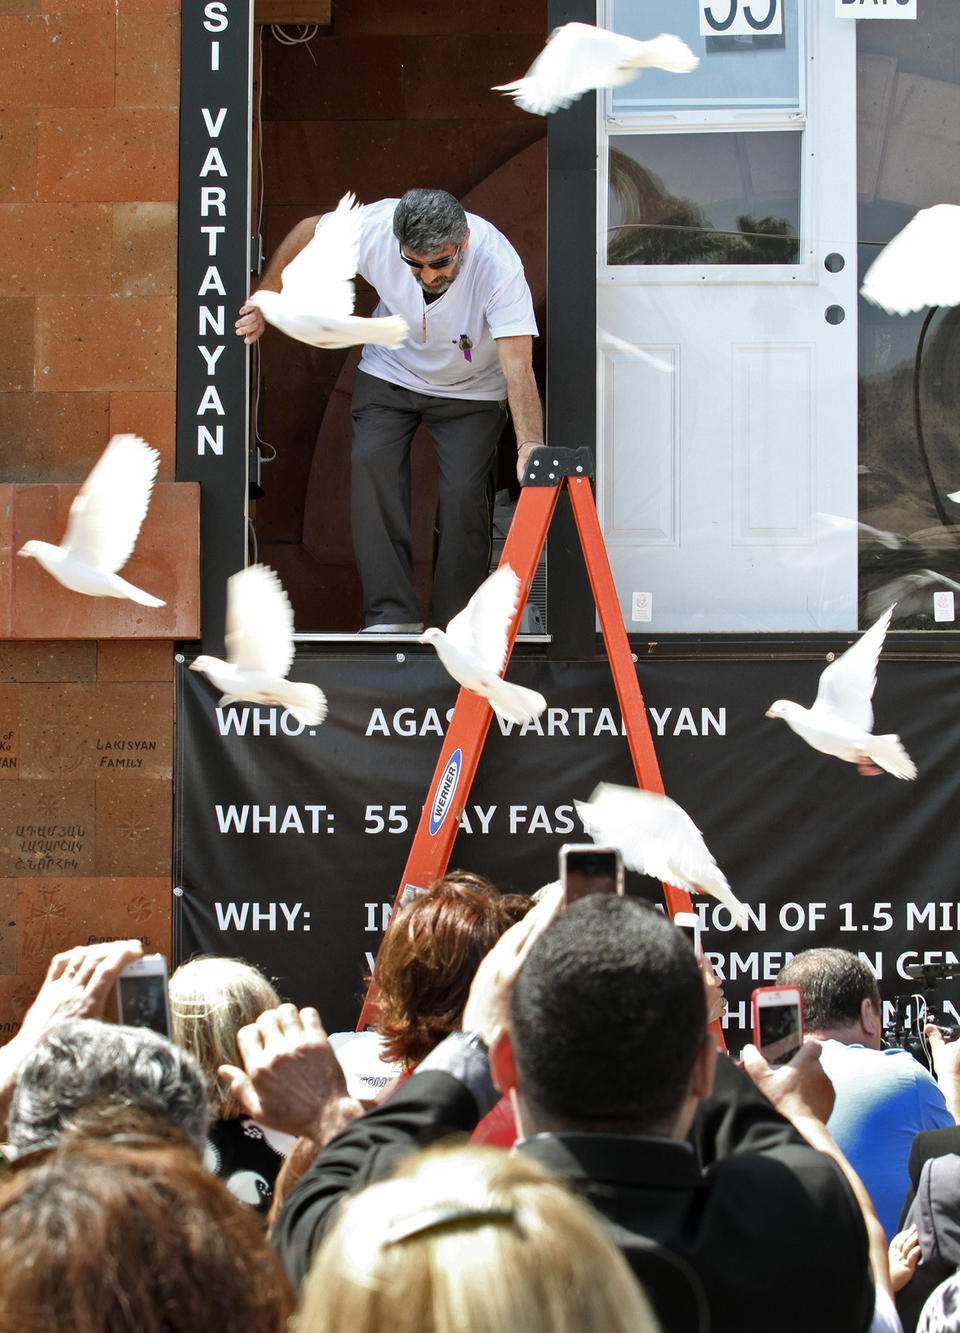 <p>Agasi Vartanyan emerges from a glass enclosure&nbsp;at St. Leon Cathedral in Burbank on Thursday, May 28, 2015, where he fasted for 55 days to commemorate the 100th anniversary of the Armenian Genocide.</p>